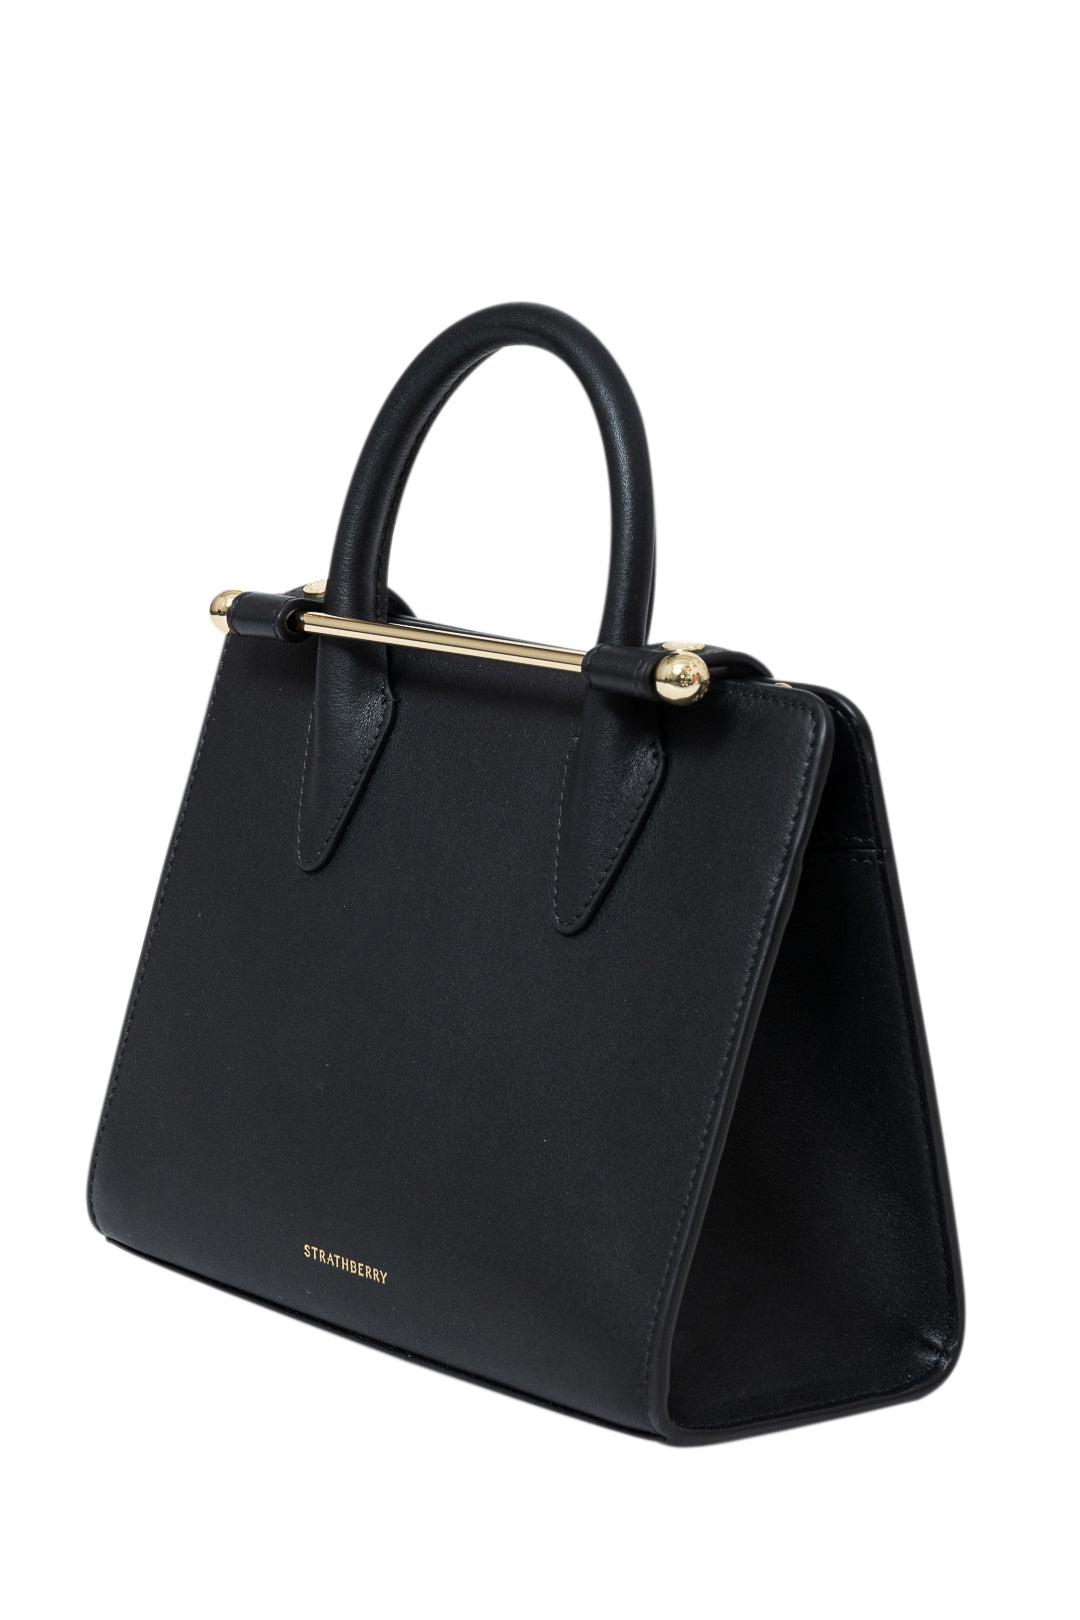 Strathberry-Mini Tote-20241-100-150-100-dgallerystore